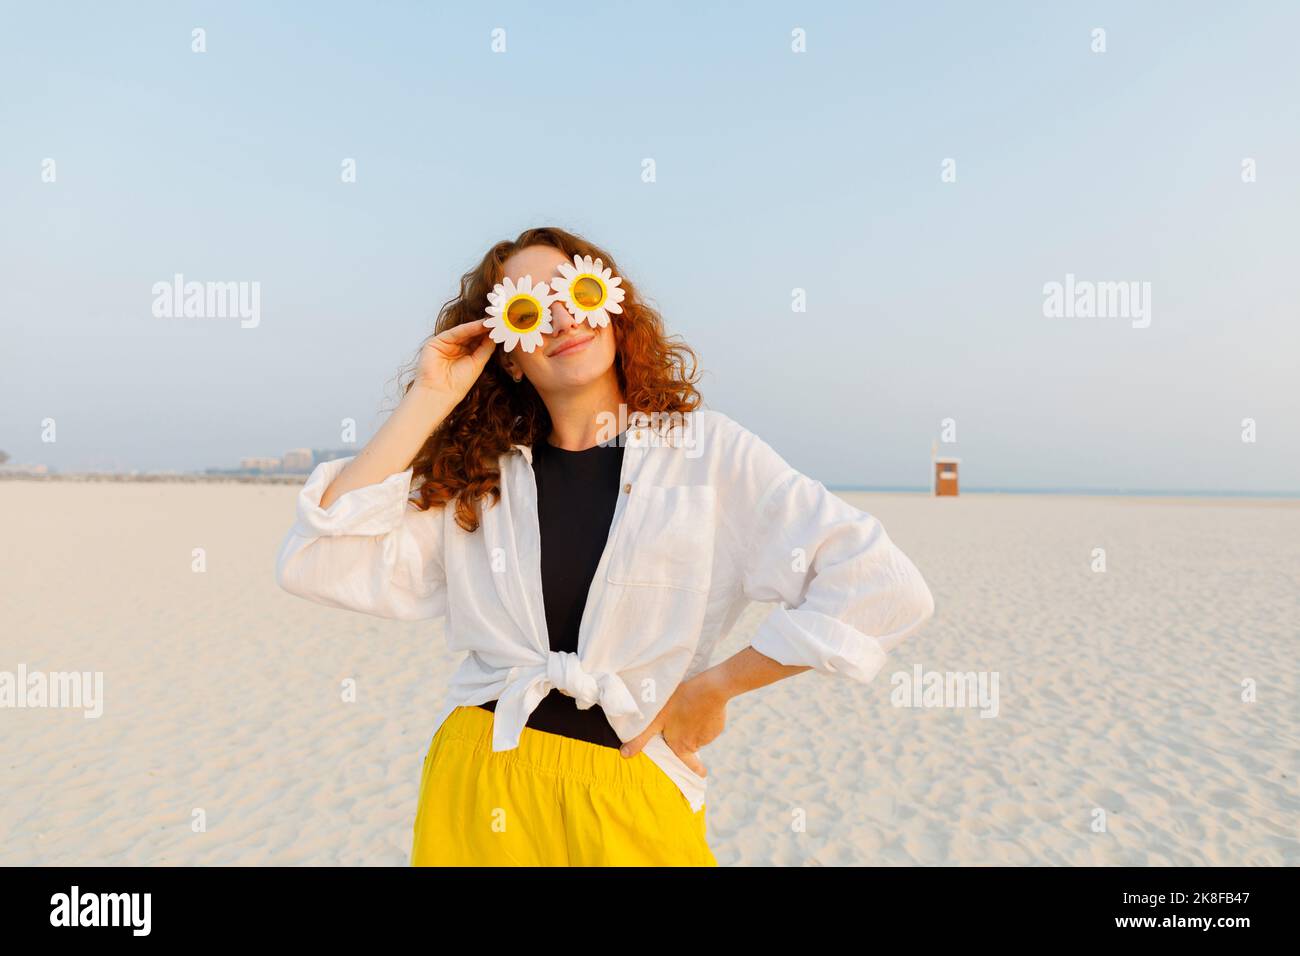 Smiling woman wearing sunflower sunglasses standing with hand on hip at beach Stock Photo